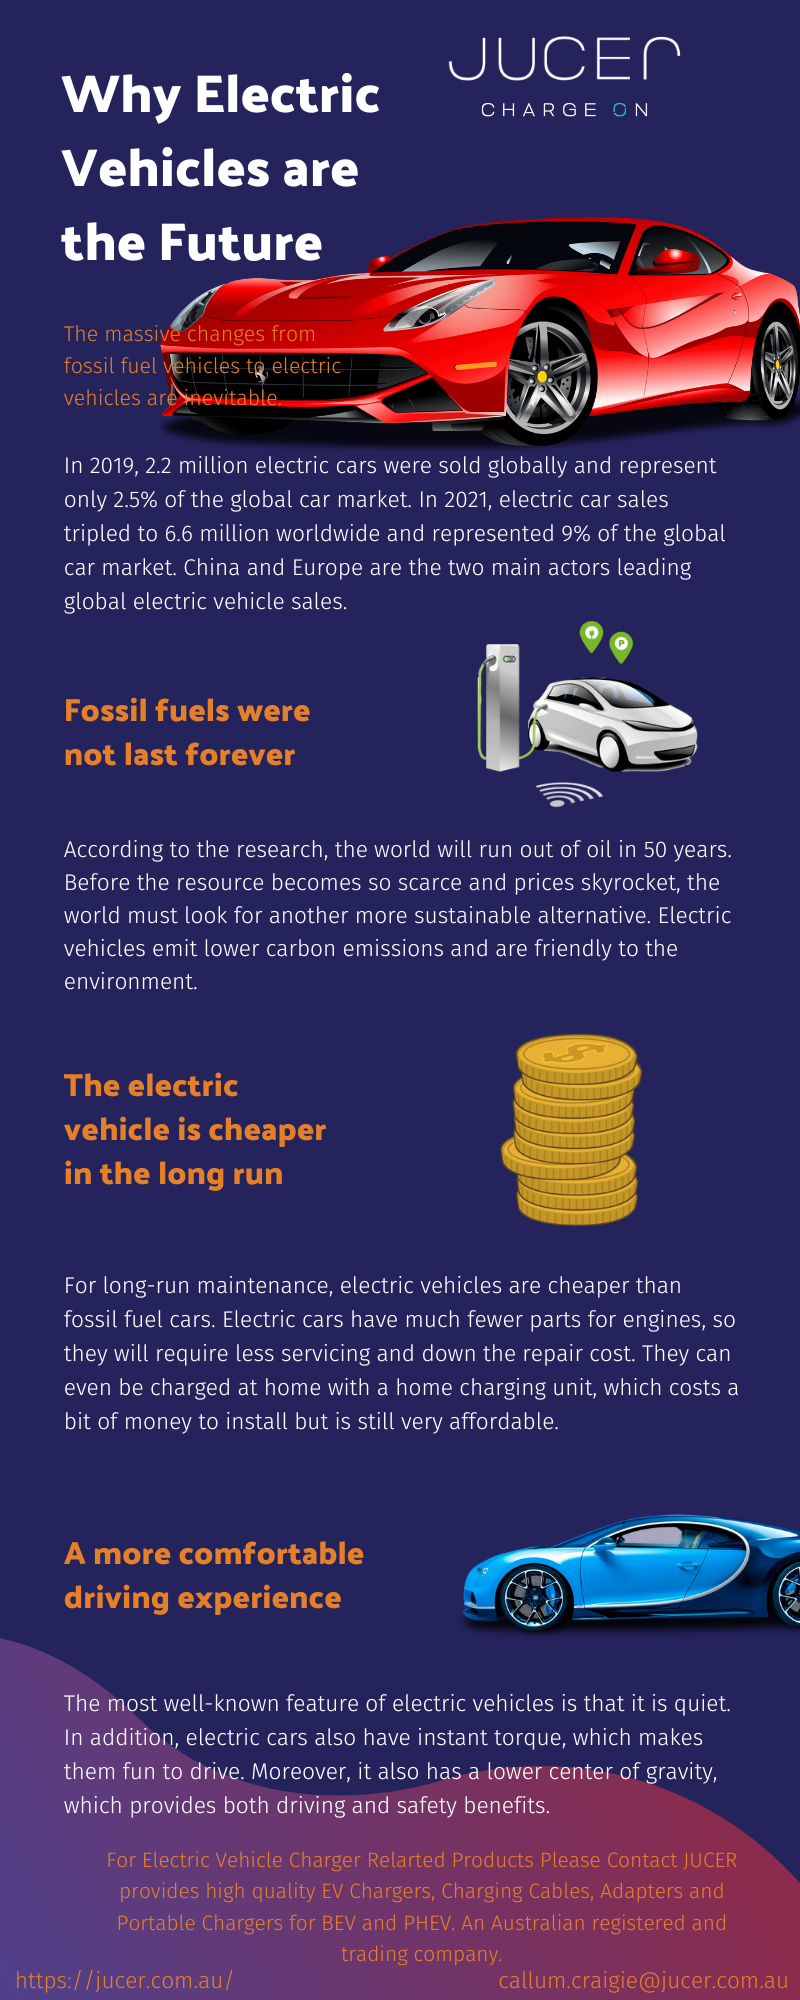 Why Electric JY SEr

Vehicles are
the Future .

 
    

In 2019, 2.2 million electric cars were sold globally and represent
only 2.5% of the global car market. In 2021, electric car sales
tripled to 6.6 million worldwide and represented 9% of the global
car market. China and Europe are the two main actors leading

global electric vehicle sales

Fossil fuels were
not last forever

According to the research, the world will run out of oil in 50 years
Before the resource becomes so scarce and prices skyrocket, the
world must look for another more sustainable alternative. Electric
vehicles emit lower carbon emissions and are friendly to the
environment

The electric
vehicle is cheaper
(LEGAL ERT)

 

For long-run maintenance, electric vehicles are cheaper than
fossil fuel cars. Electric cars have much fewer parts for engines, so
they will require less servicing and down the repair cost. They can
even be charged at home with a home charging unit, which costs a
bit of money to install but is still very affordable

A more comfortable
driving experience

 

The most well-known feature of electric vehicles 1s that it 1s quiet
In addition, electric cars also have instant torque, which makes
them fun to drive. Moreover, it also has alower center of gravity,
which provides both driving and safety benefits.

 

c Vehicle Charger Relarte

 
 
 

high quality EV Chargers,
for BEV and PHEV. An A
trading company.
callum.craigie@jucer co